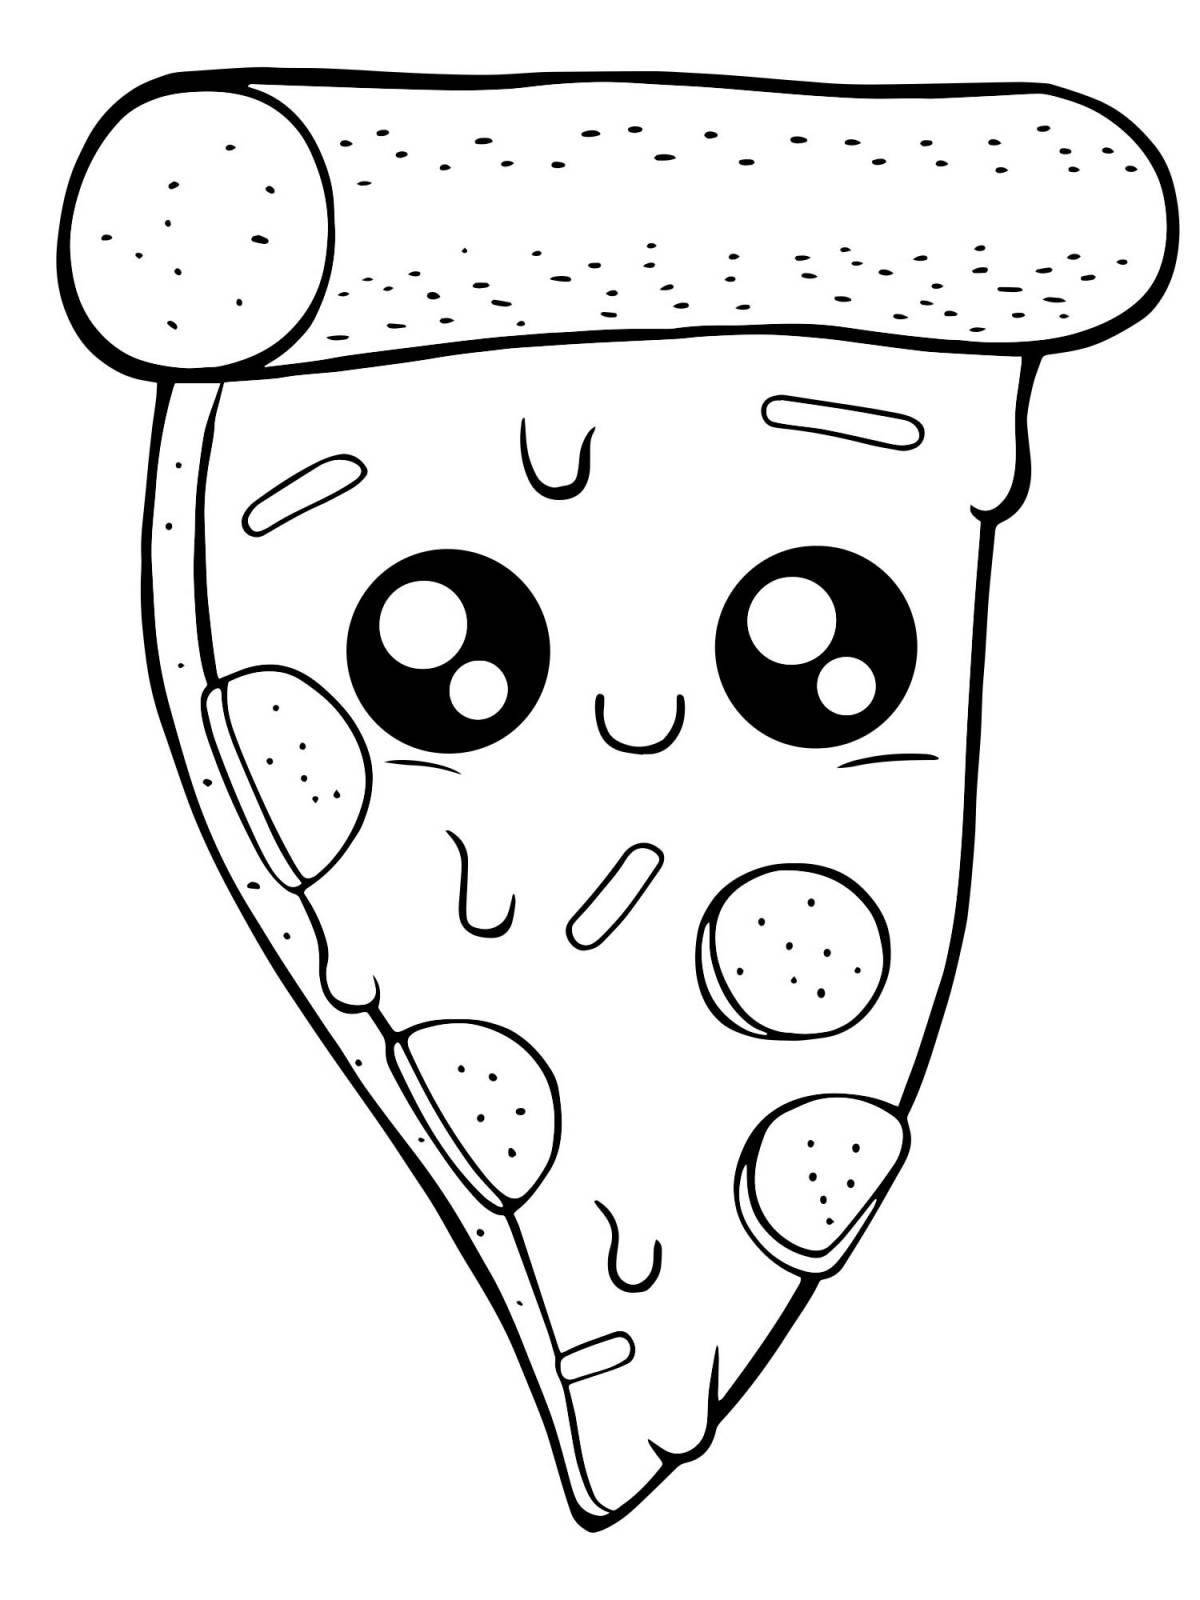 Colorful pizza coloring page